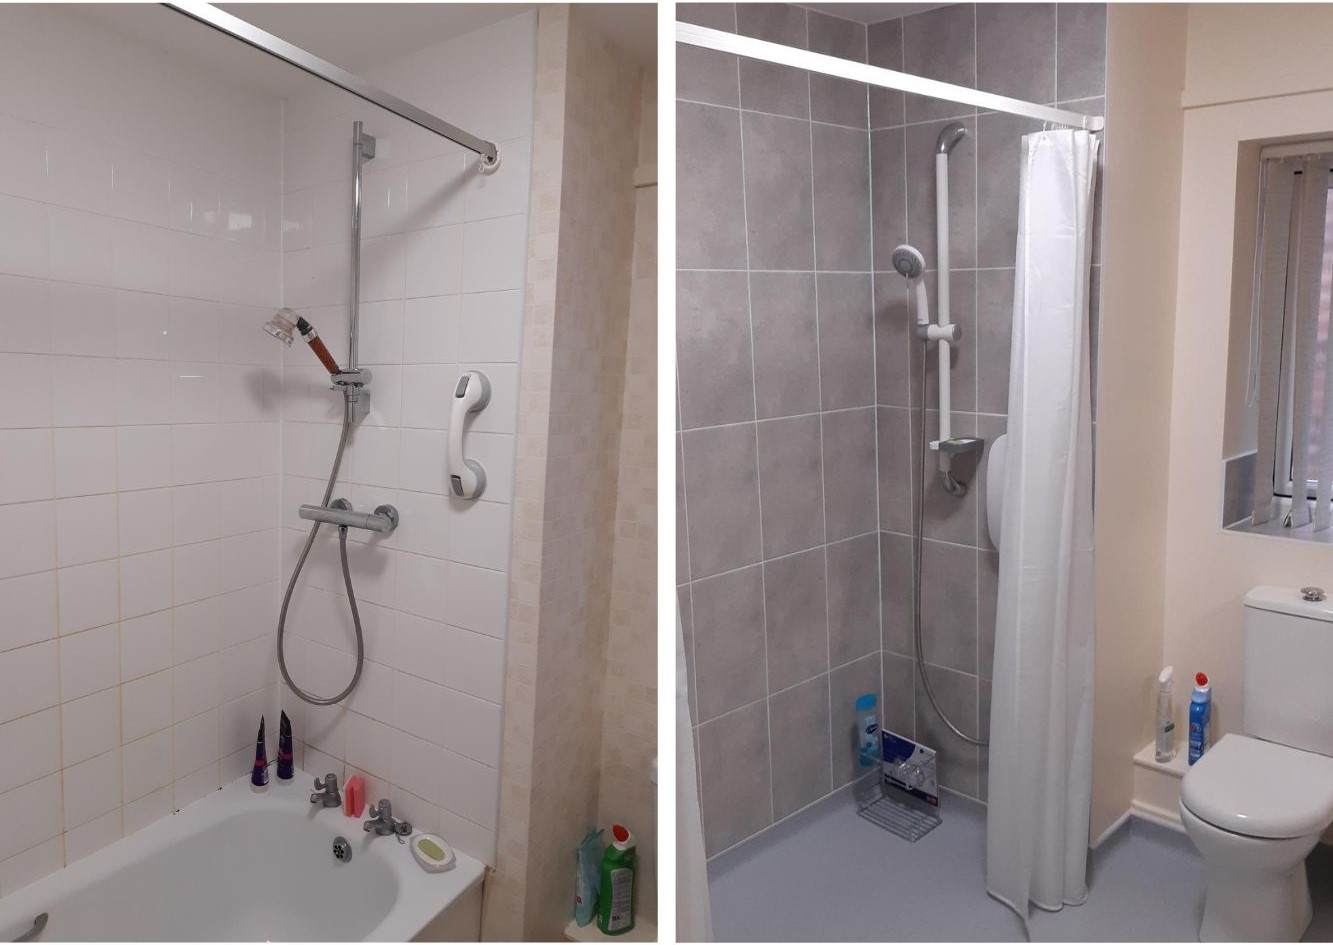 Pictured are before and after photos of a resident’s bathroom with the renovation funded through the Disabled Facilities Grant.